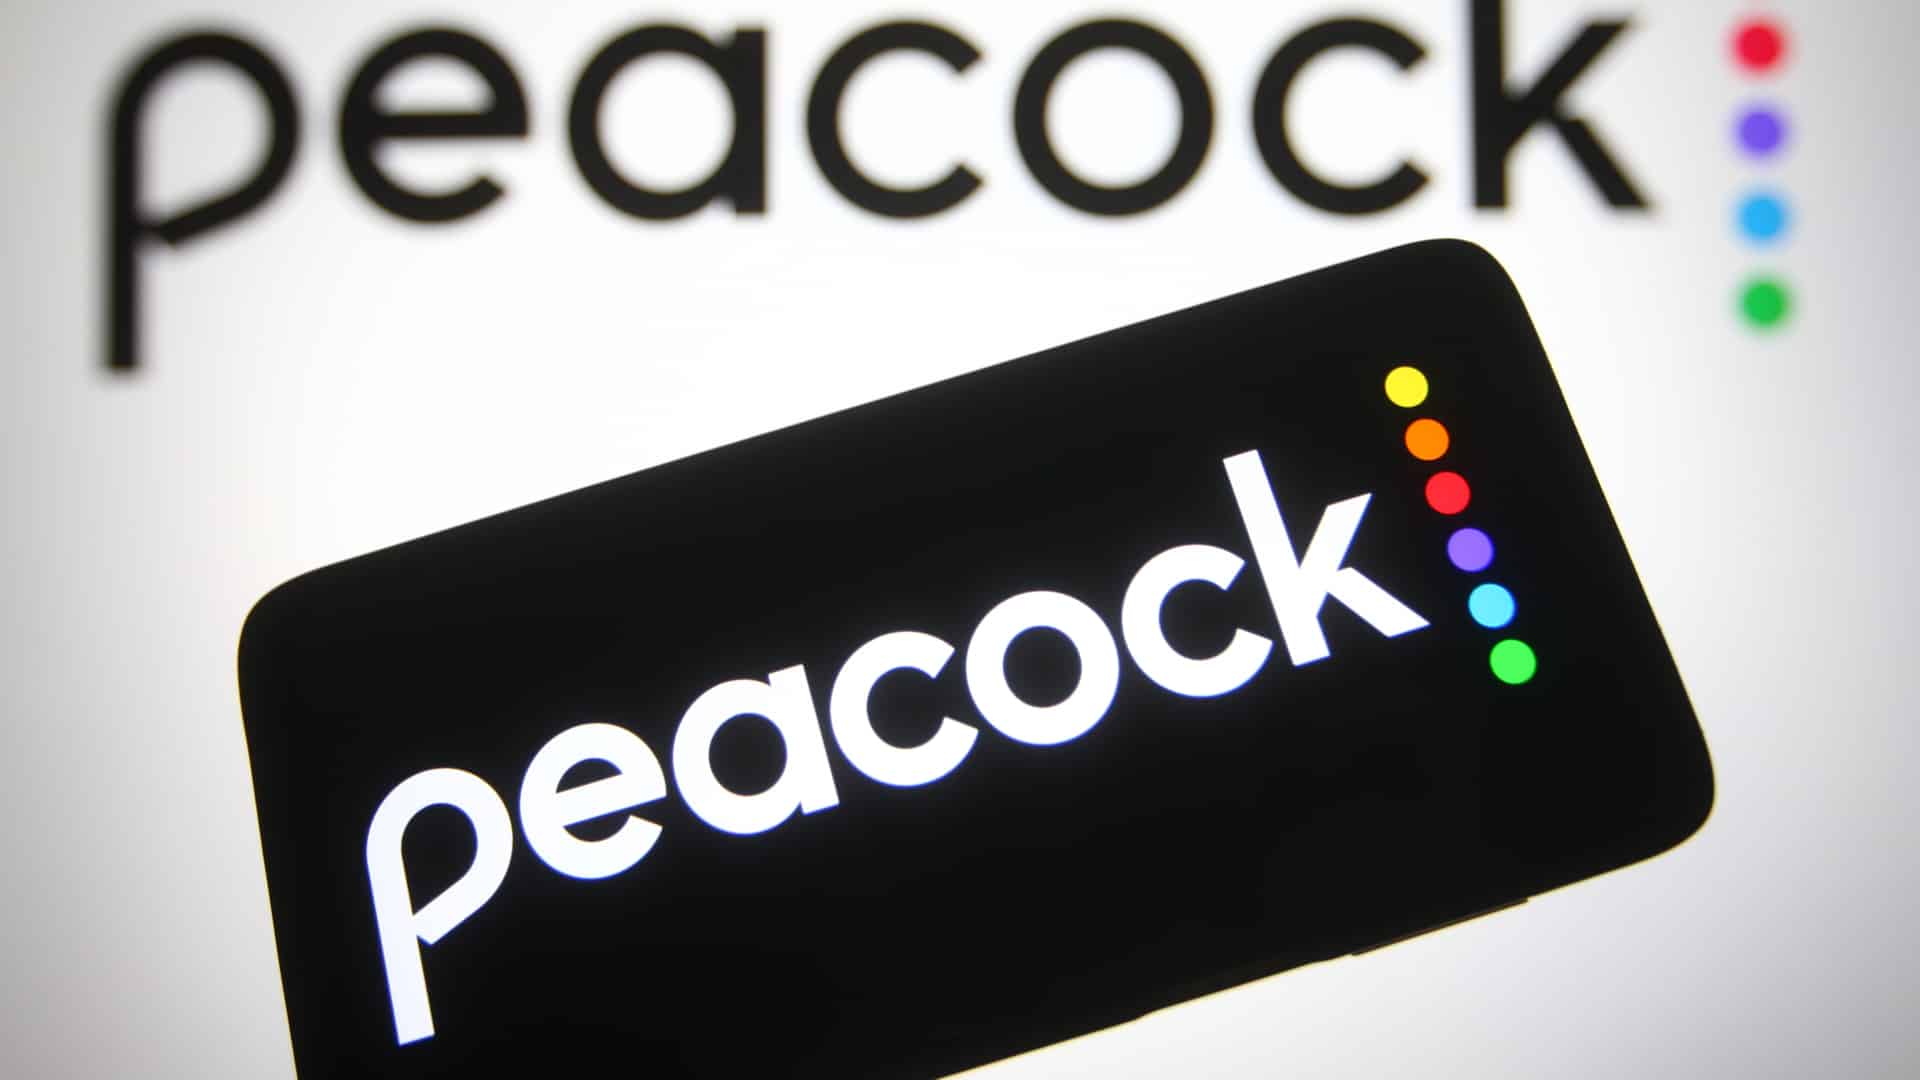 The logo of Peacock is shown in front of a computer screen.